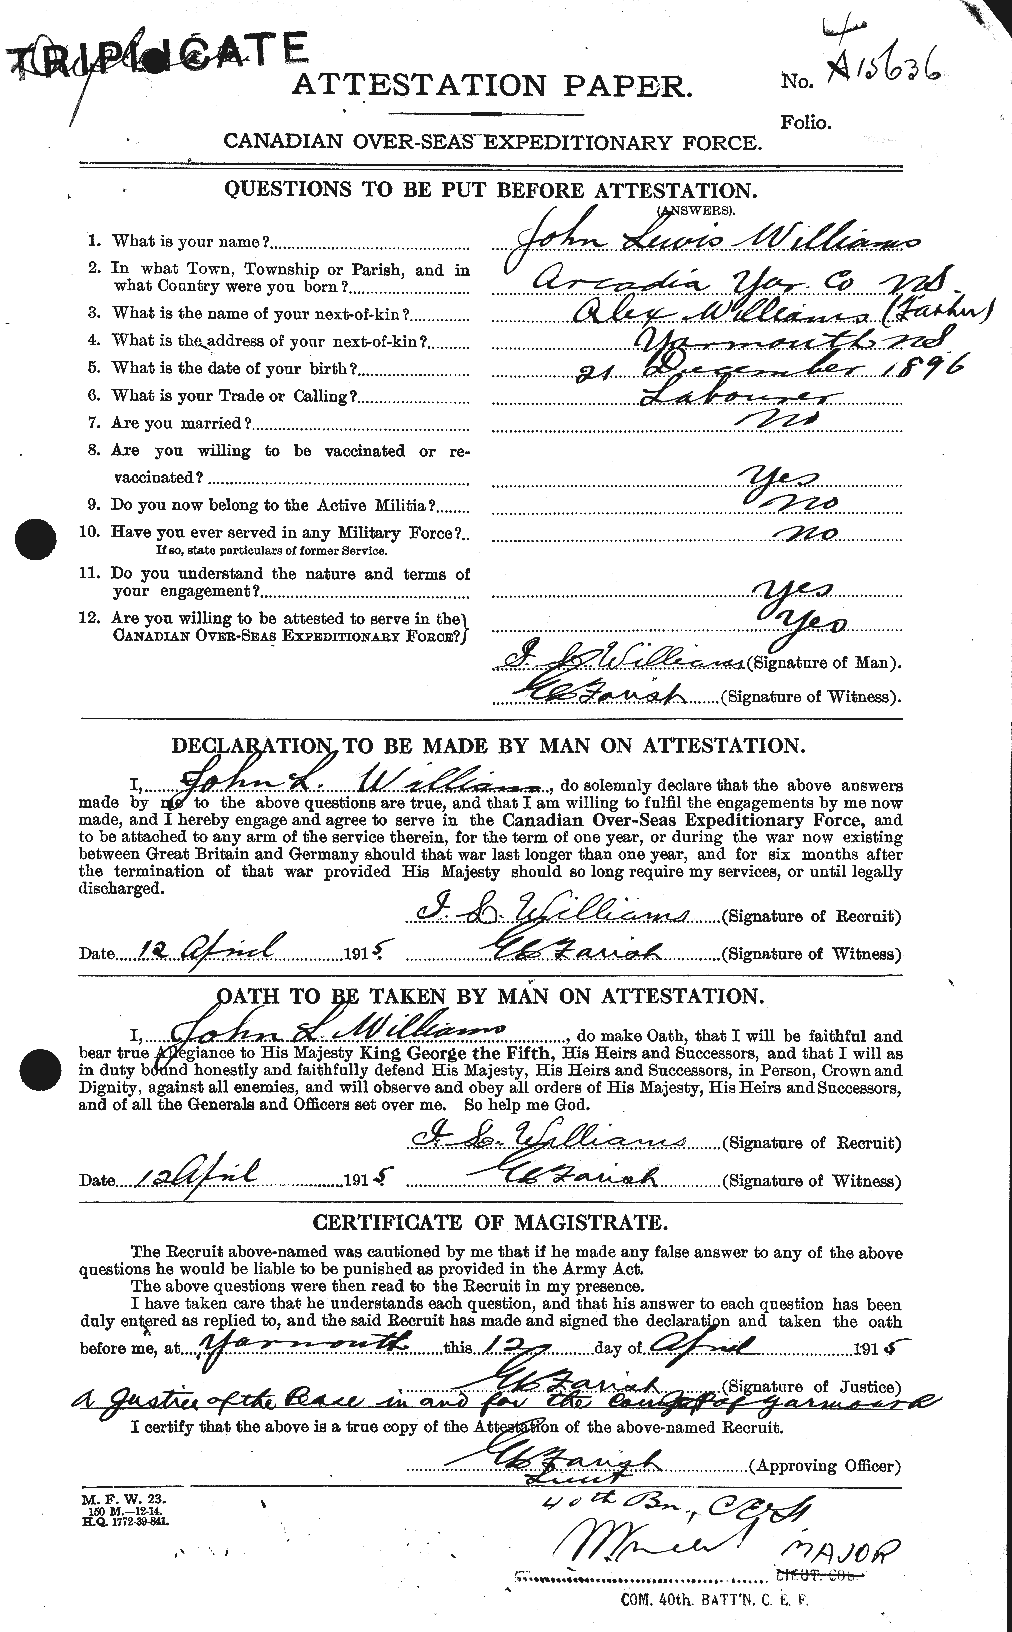 Personnel Records of the First World War - CEF 673027a